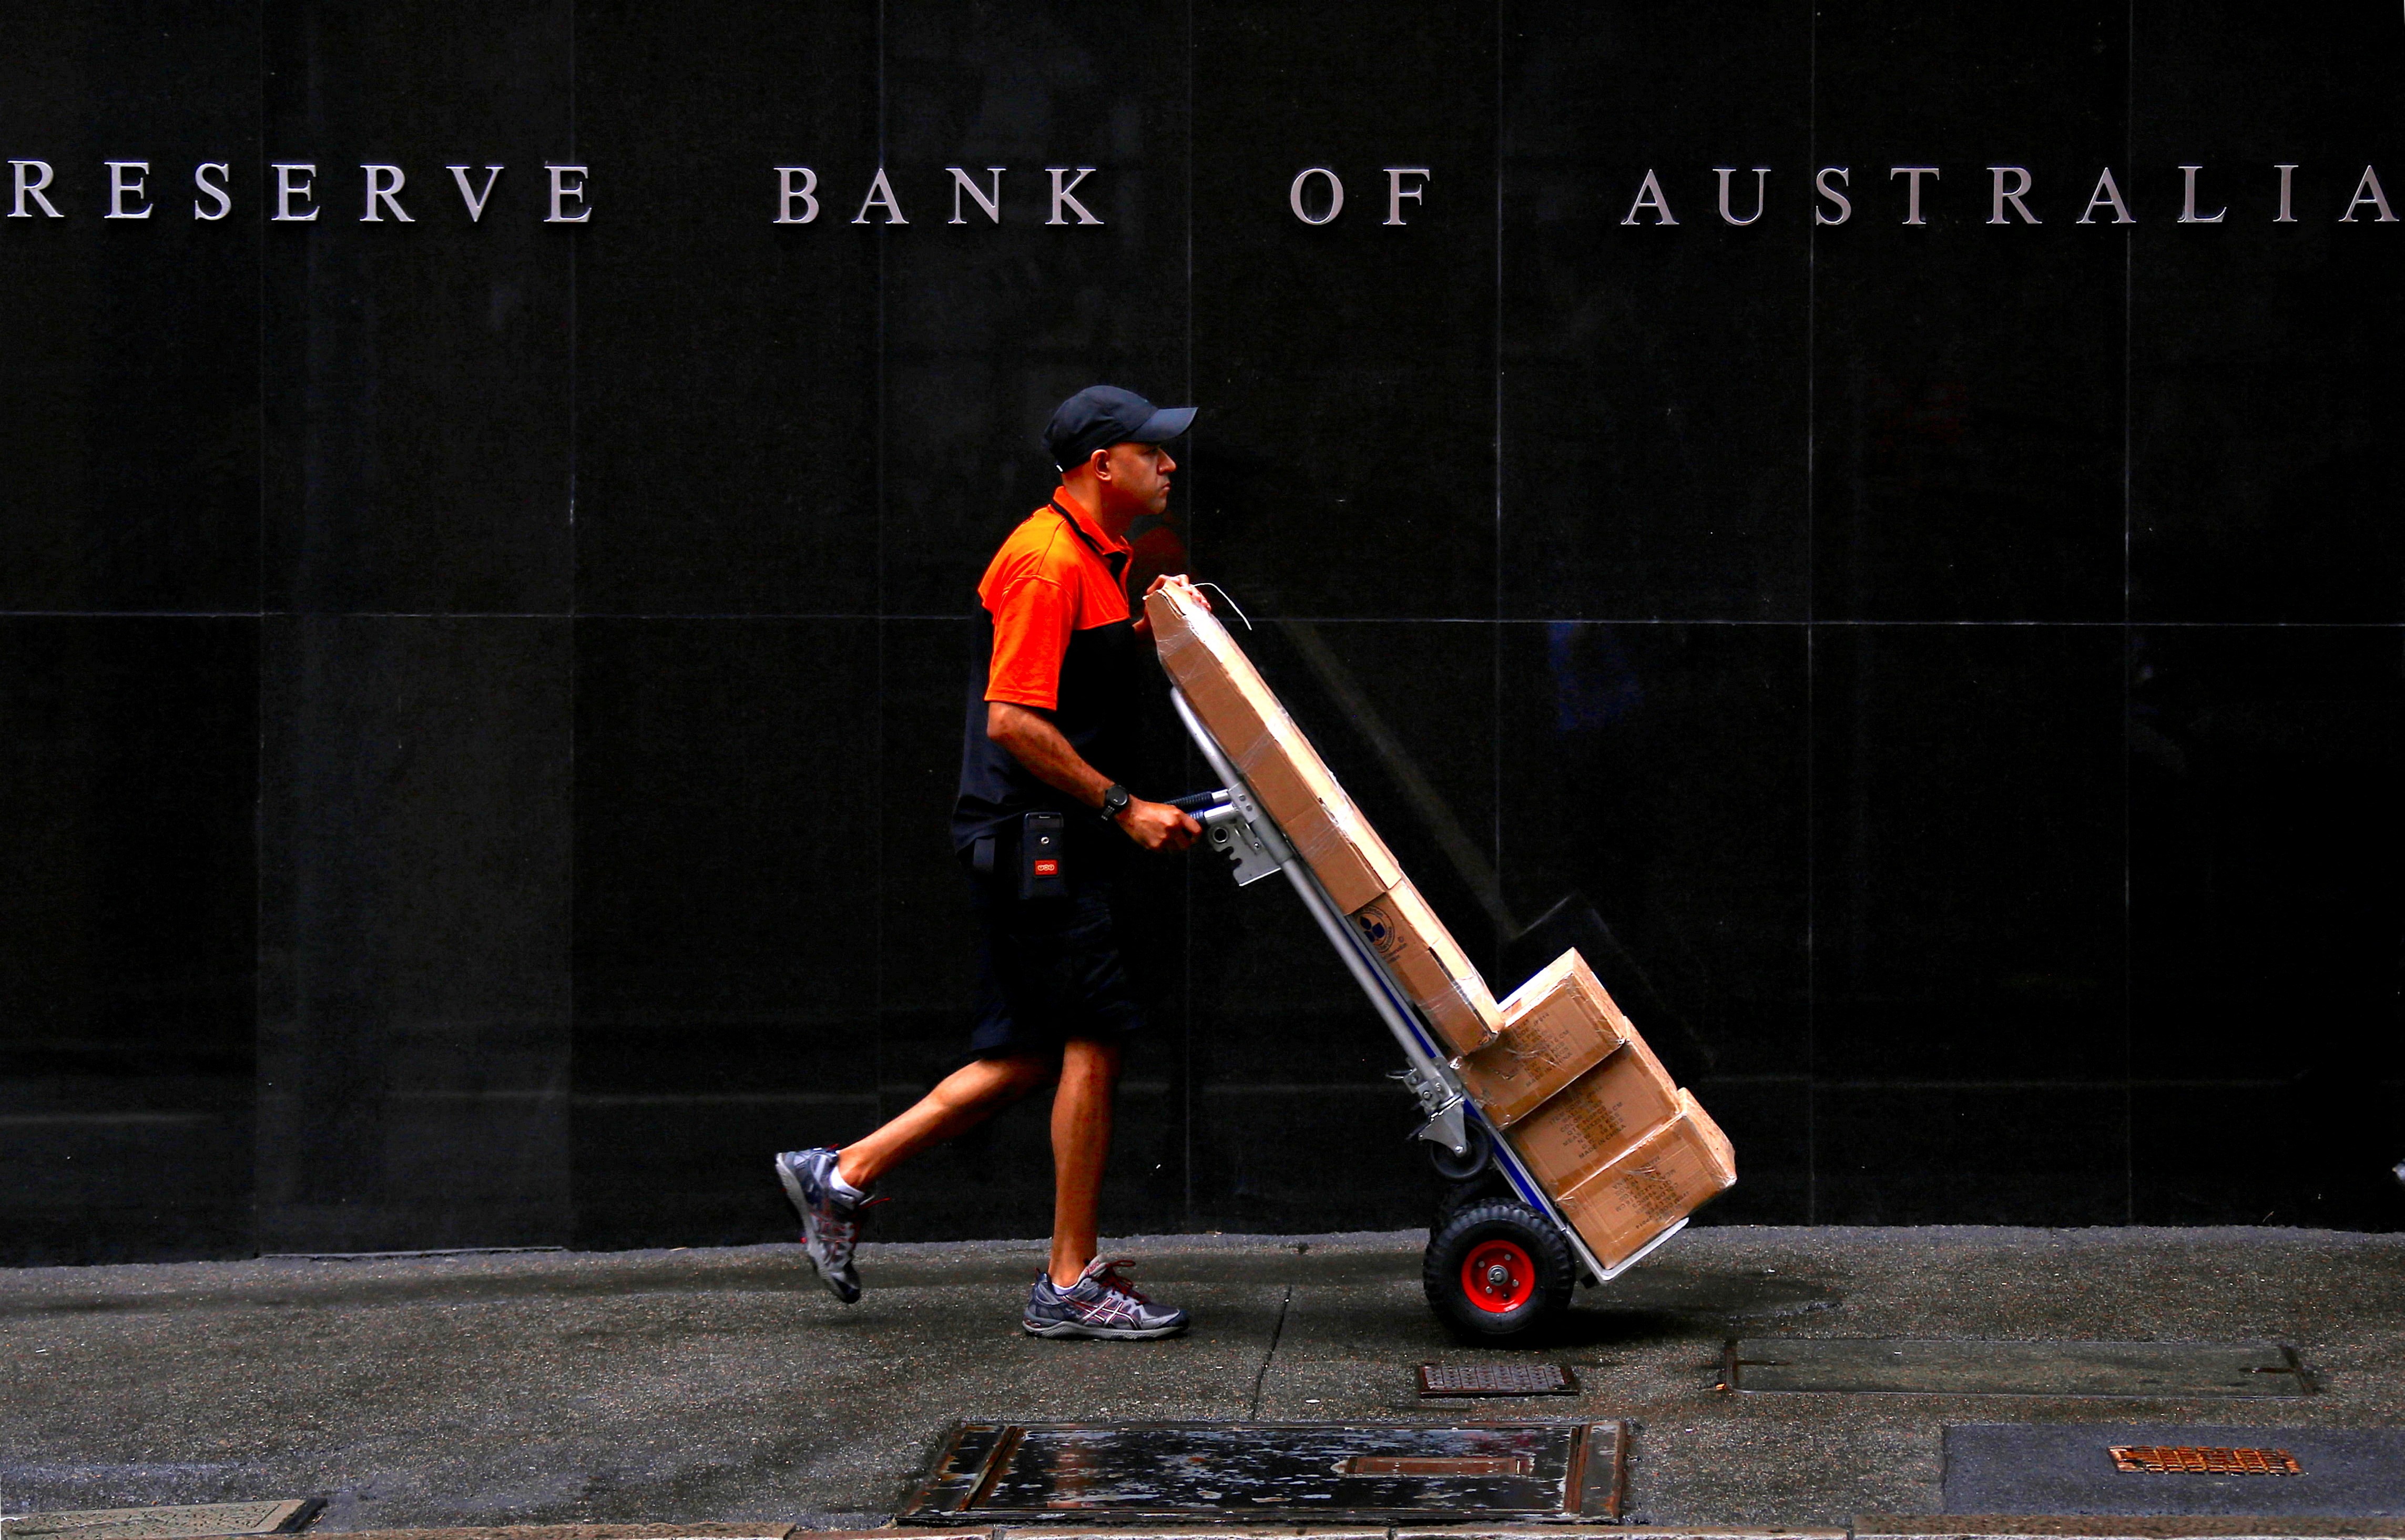 Australia expects unemployment rate to rise as global economy slows